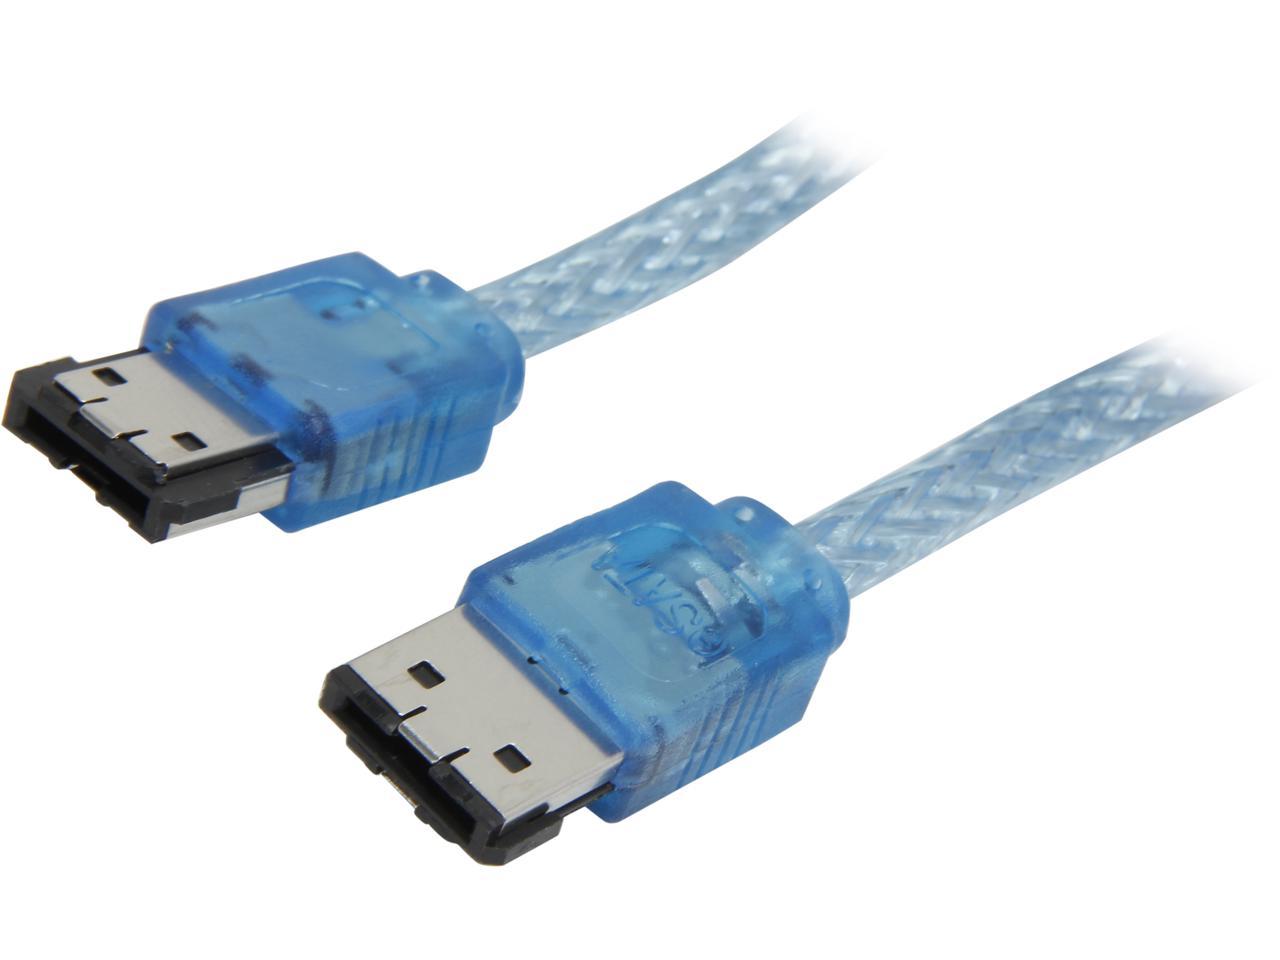 Nippon Labs ESATA3-R-6-ll-BU 6 ft. eSATA III(Type I) Male to Male Cable, Blue - image 1 of 3